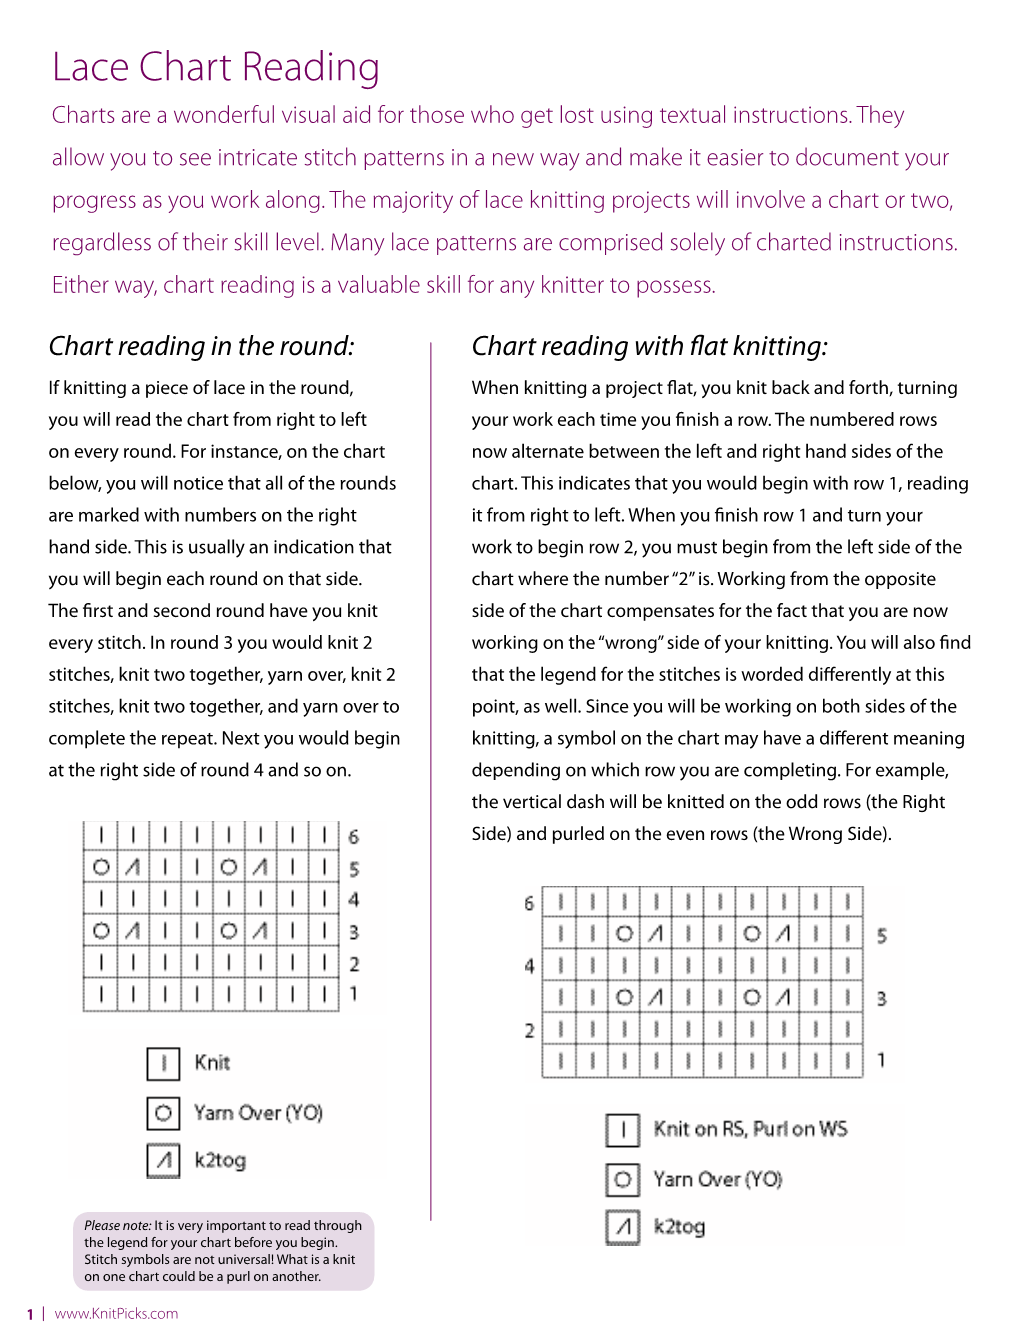 Lace Chart Reading Charts Are a Wonderful Visual Aid for Those Who Get Lost Using Textual Instructions